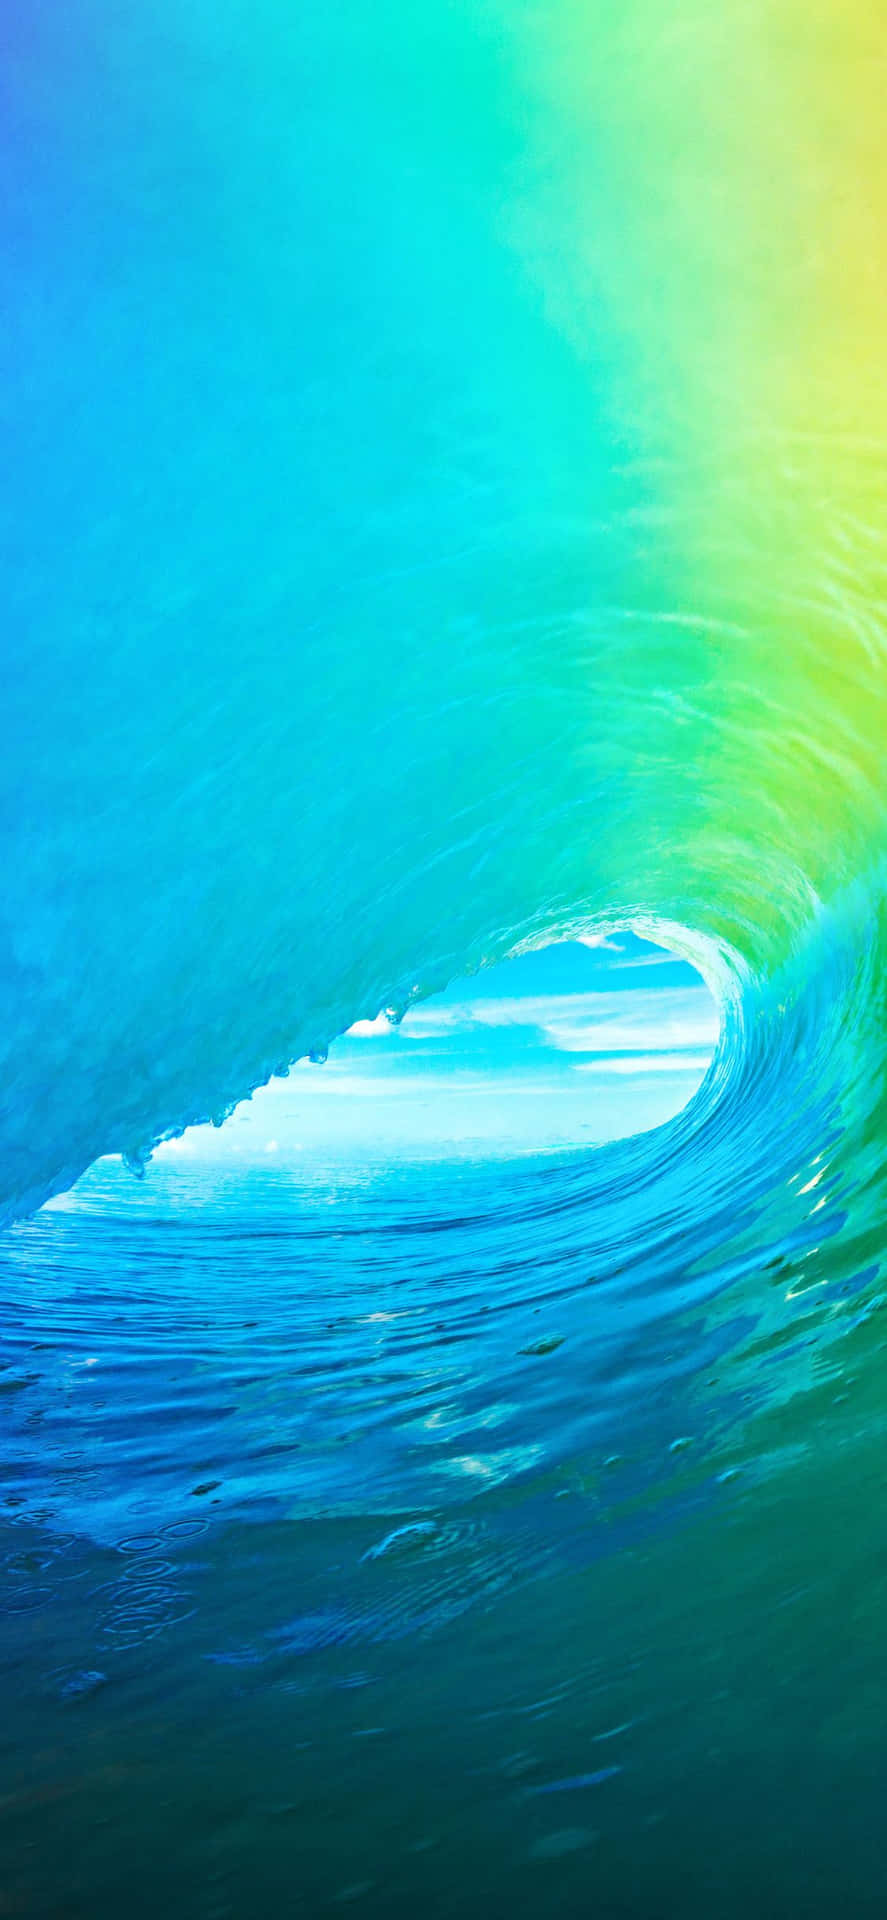 Original Iphone 5s Colorful Wave Background